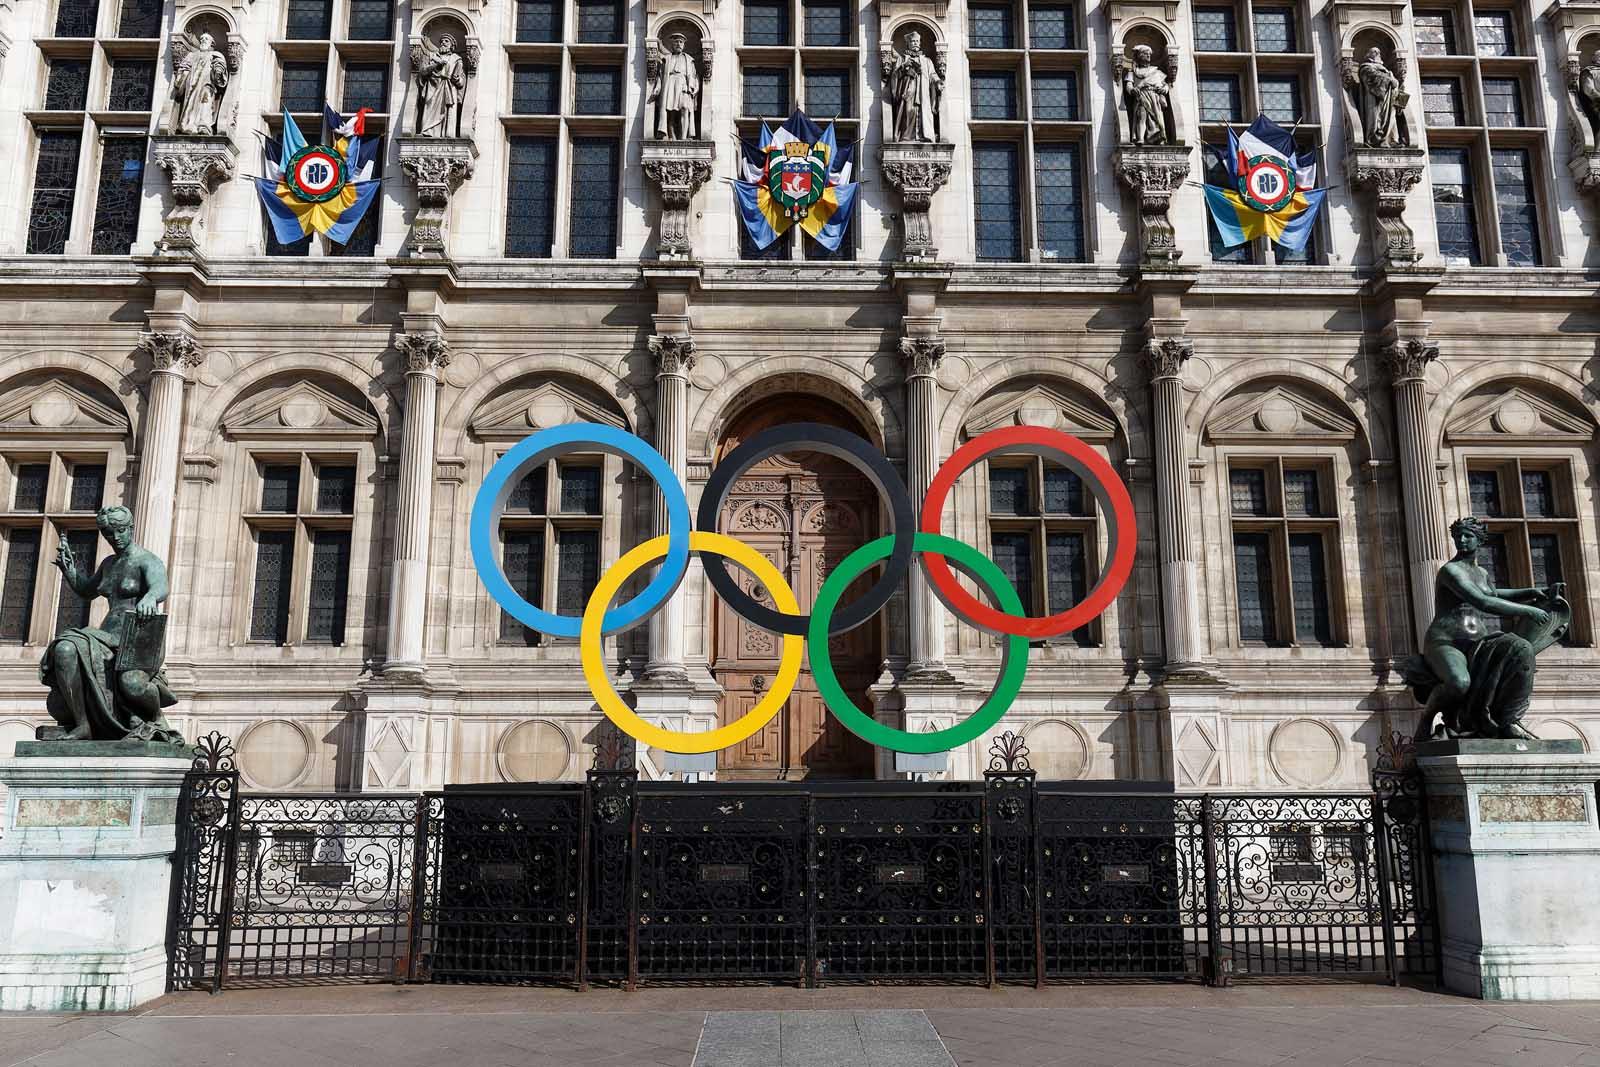 Cost of a trip to Paris during the 2024 Olympics